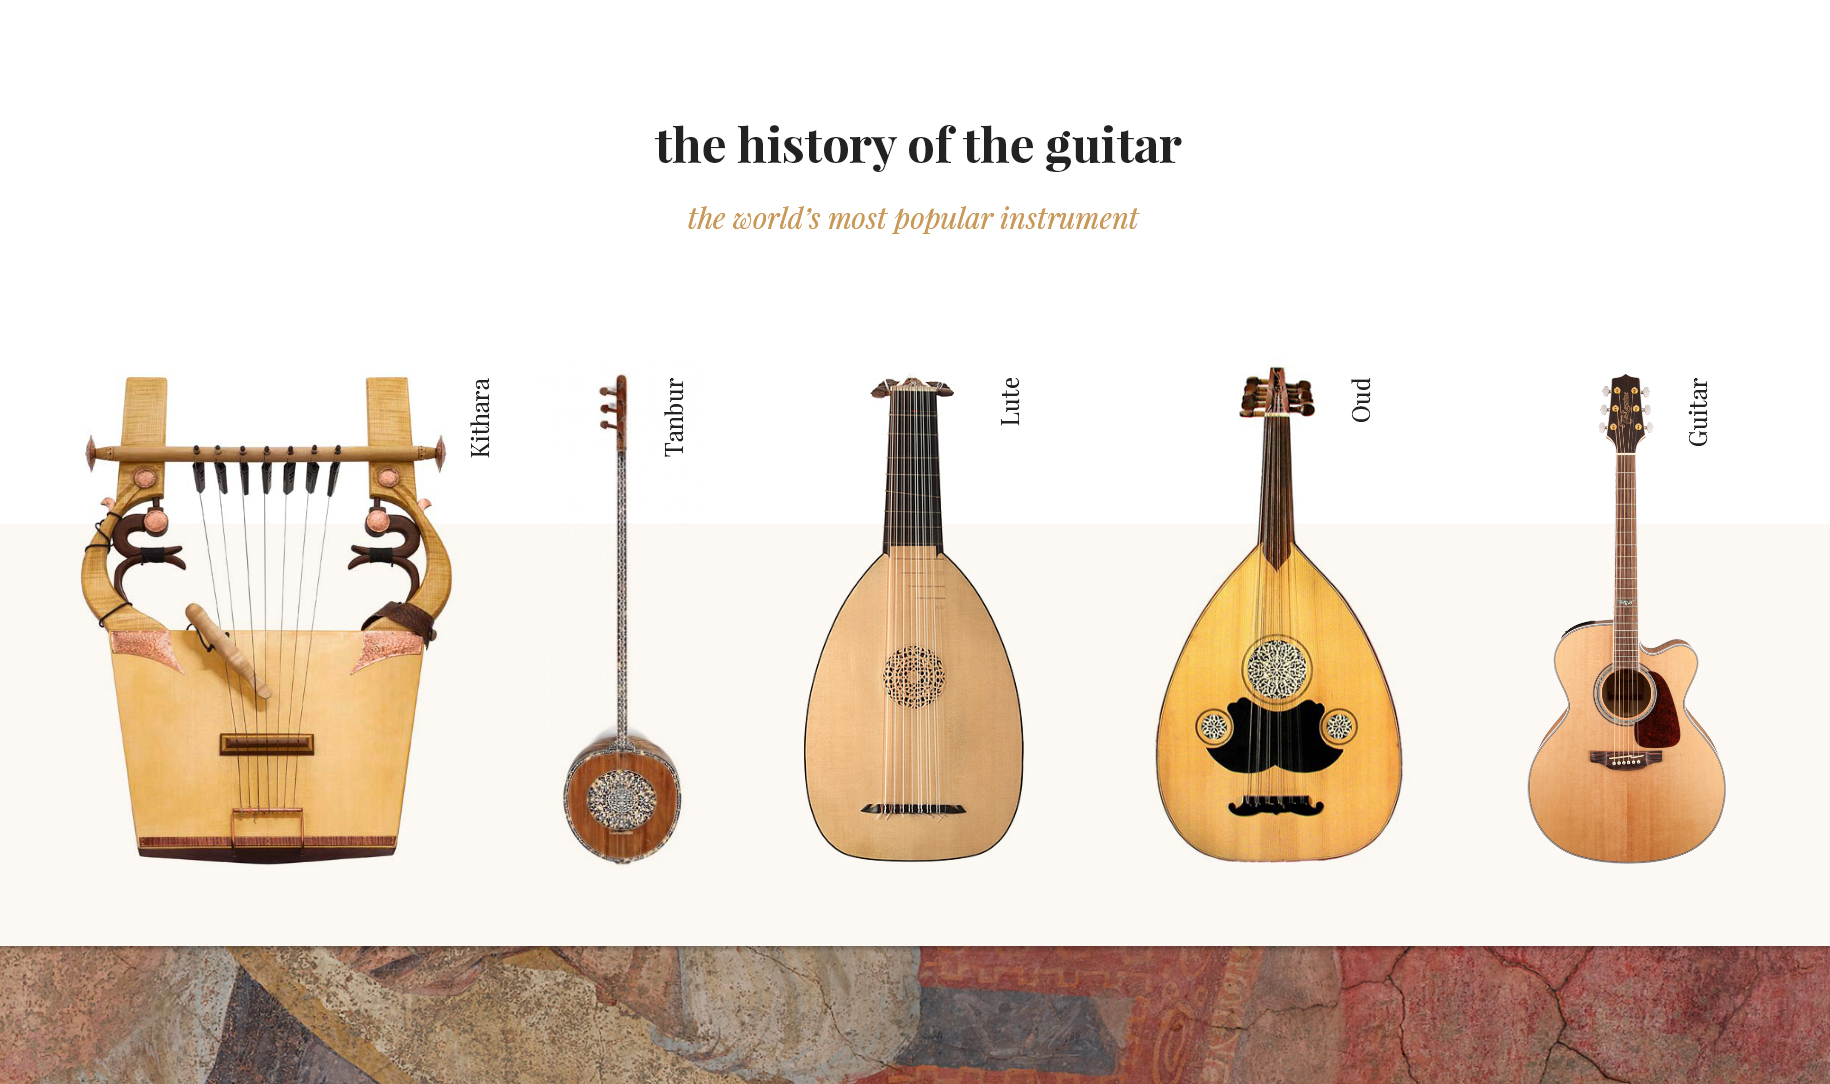 The History of the Guitar, the World's Most Popular Instrument